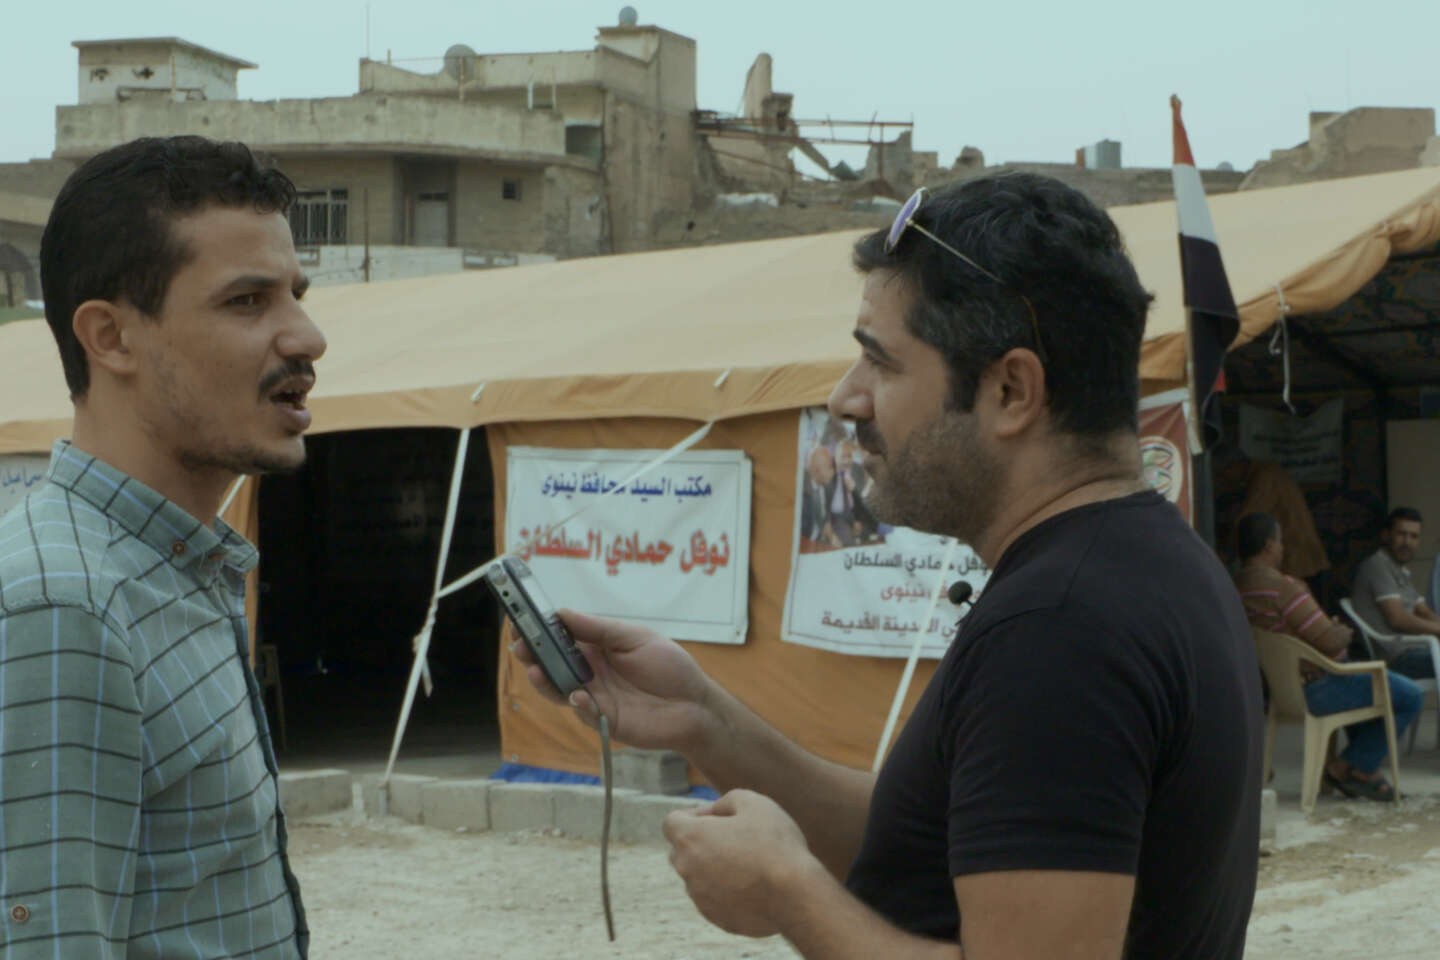 on the airwaves, Iraqis advocate living together